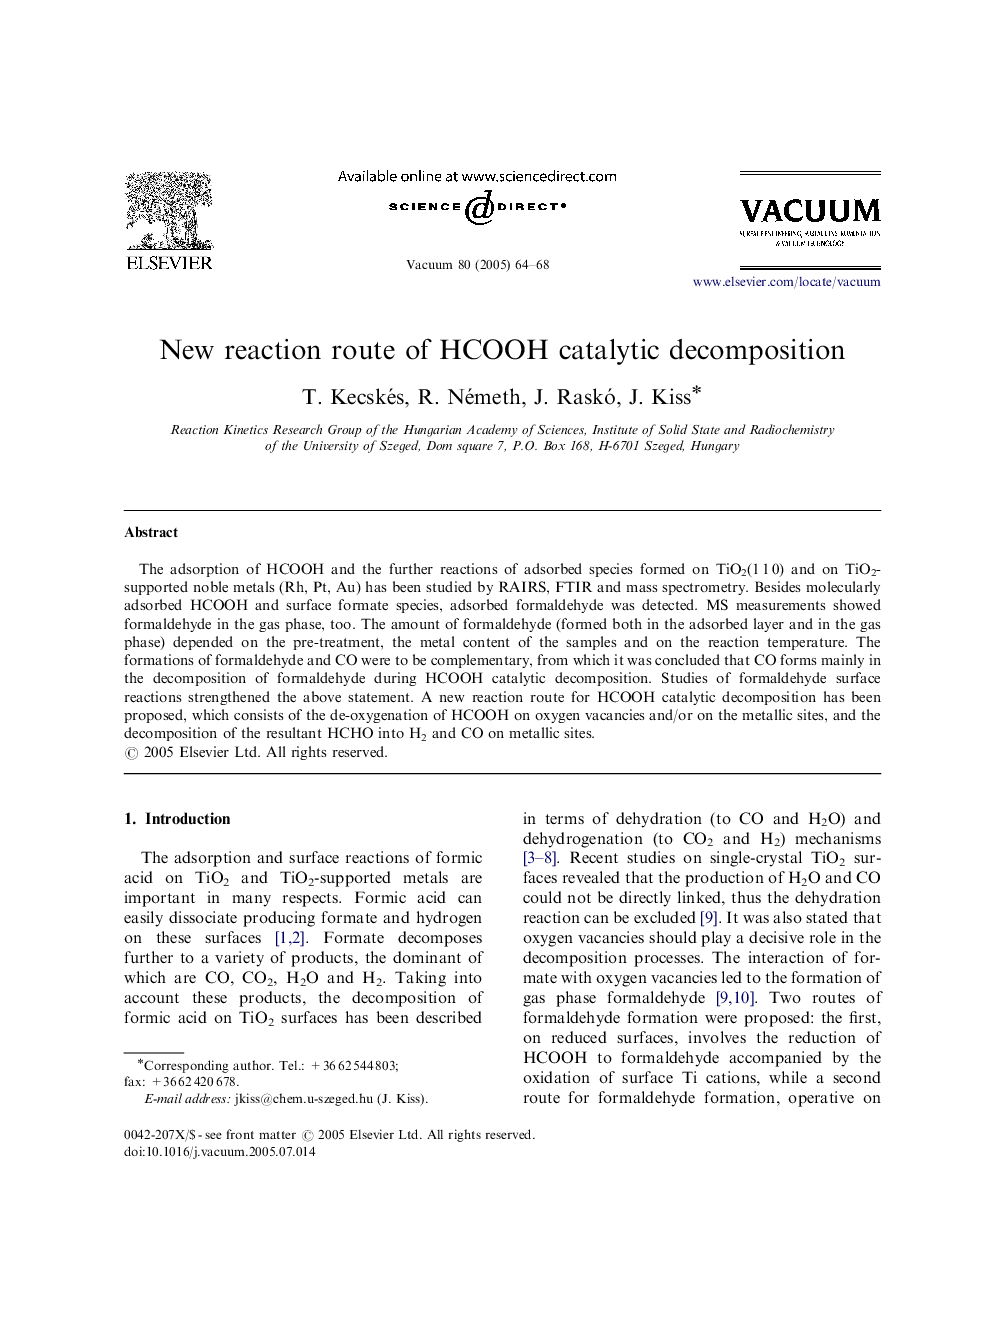 New reaction route of HCOOH catalytic decomposition